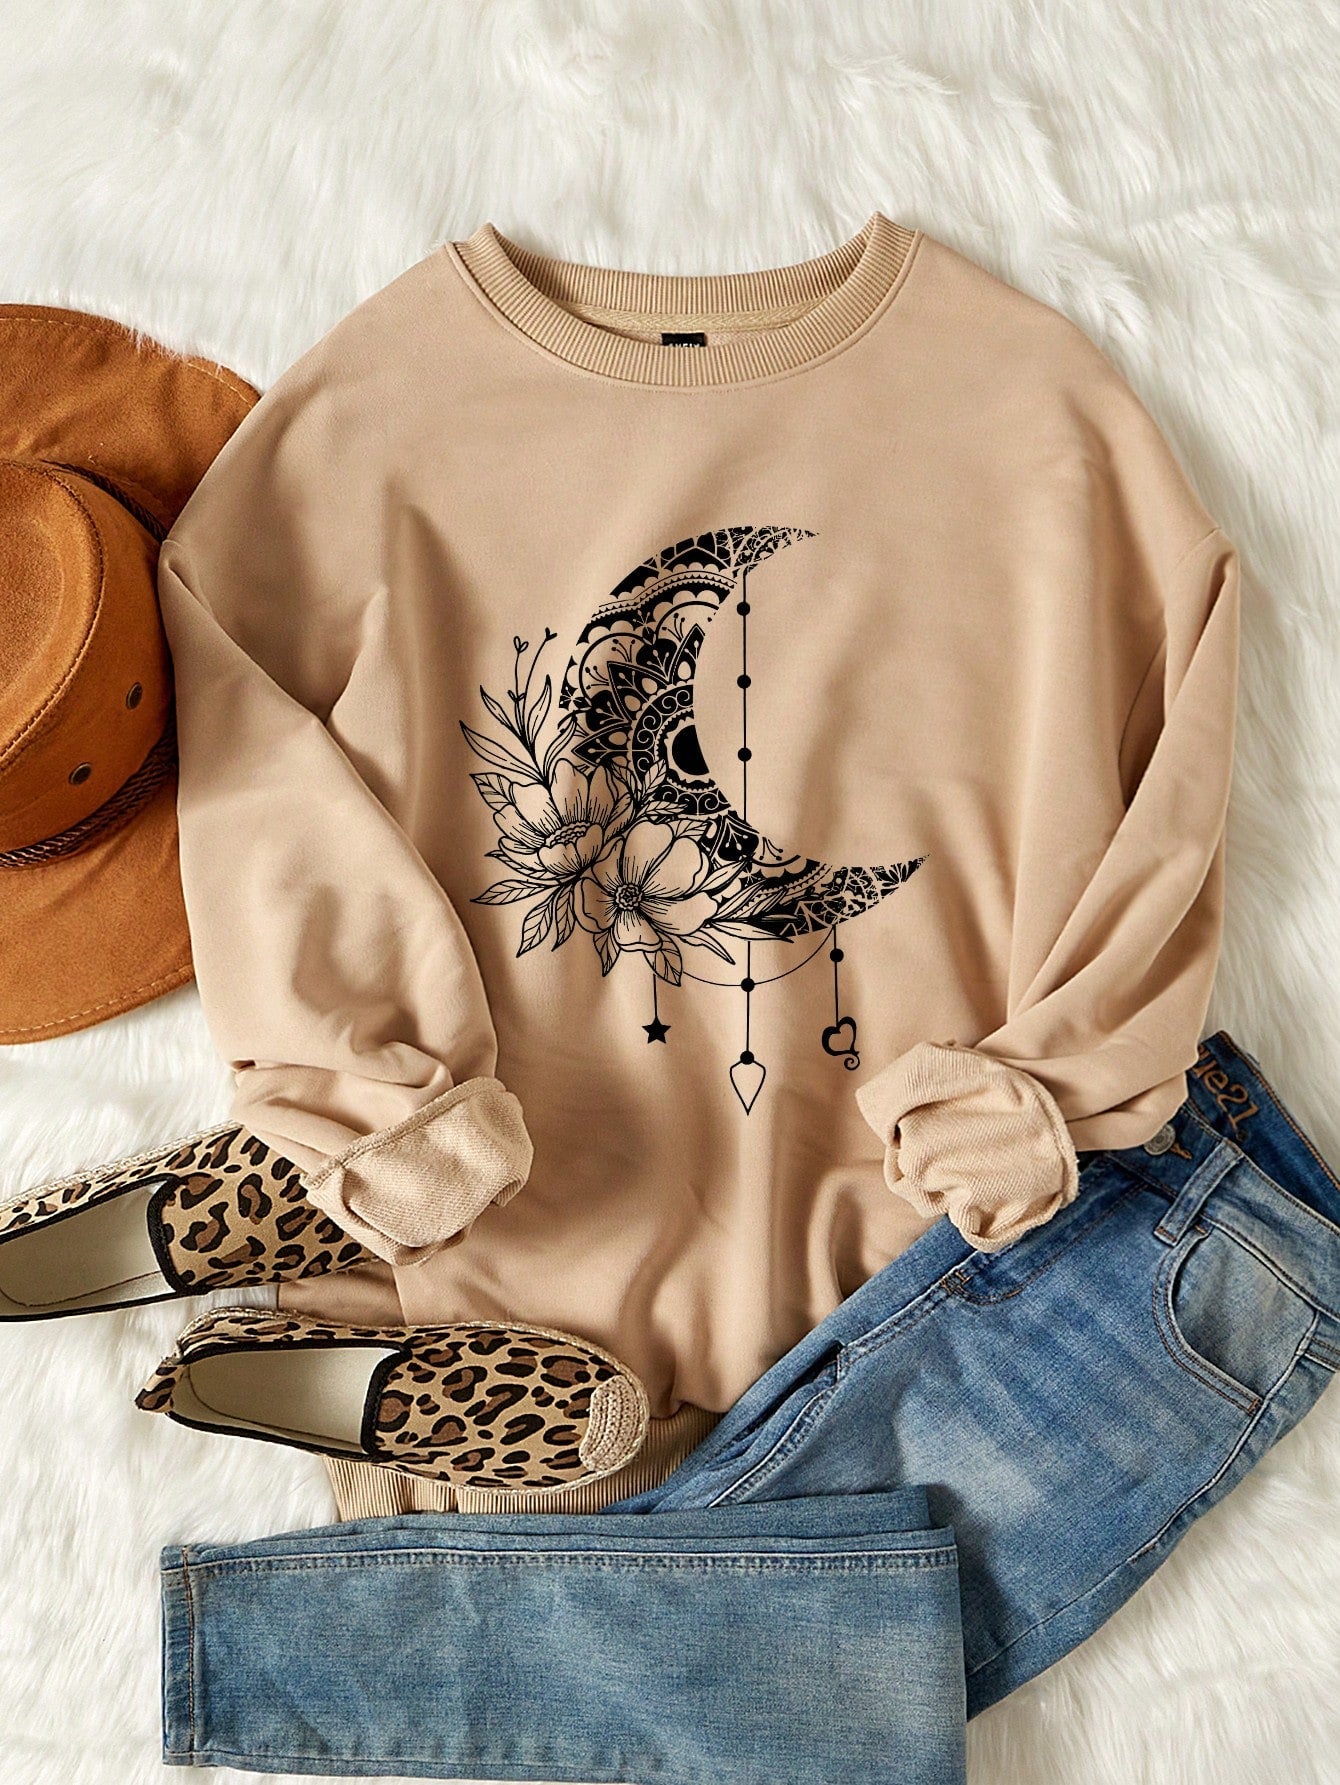 Women's Round Neck Sweatshirt With Moon And Flowers Design, Suitable For Autumn And Winter